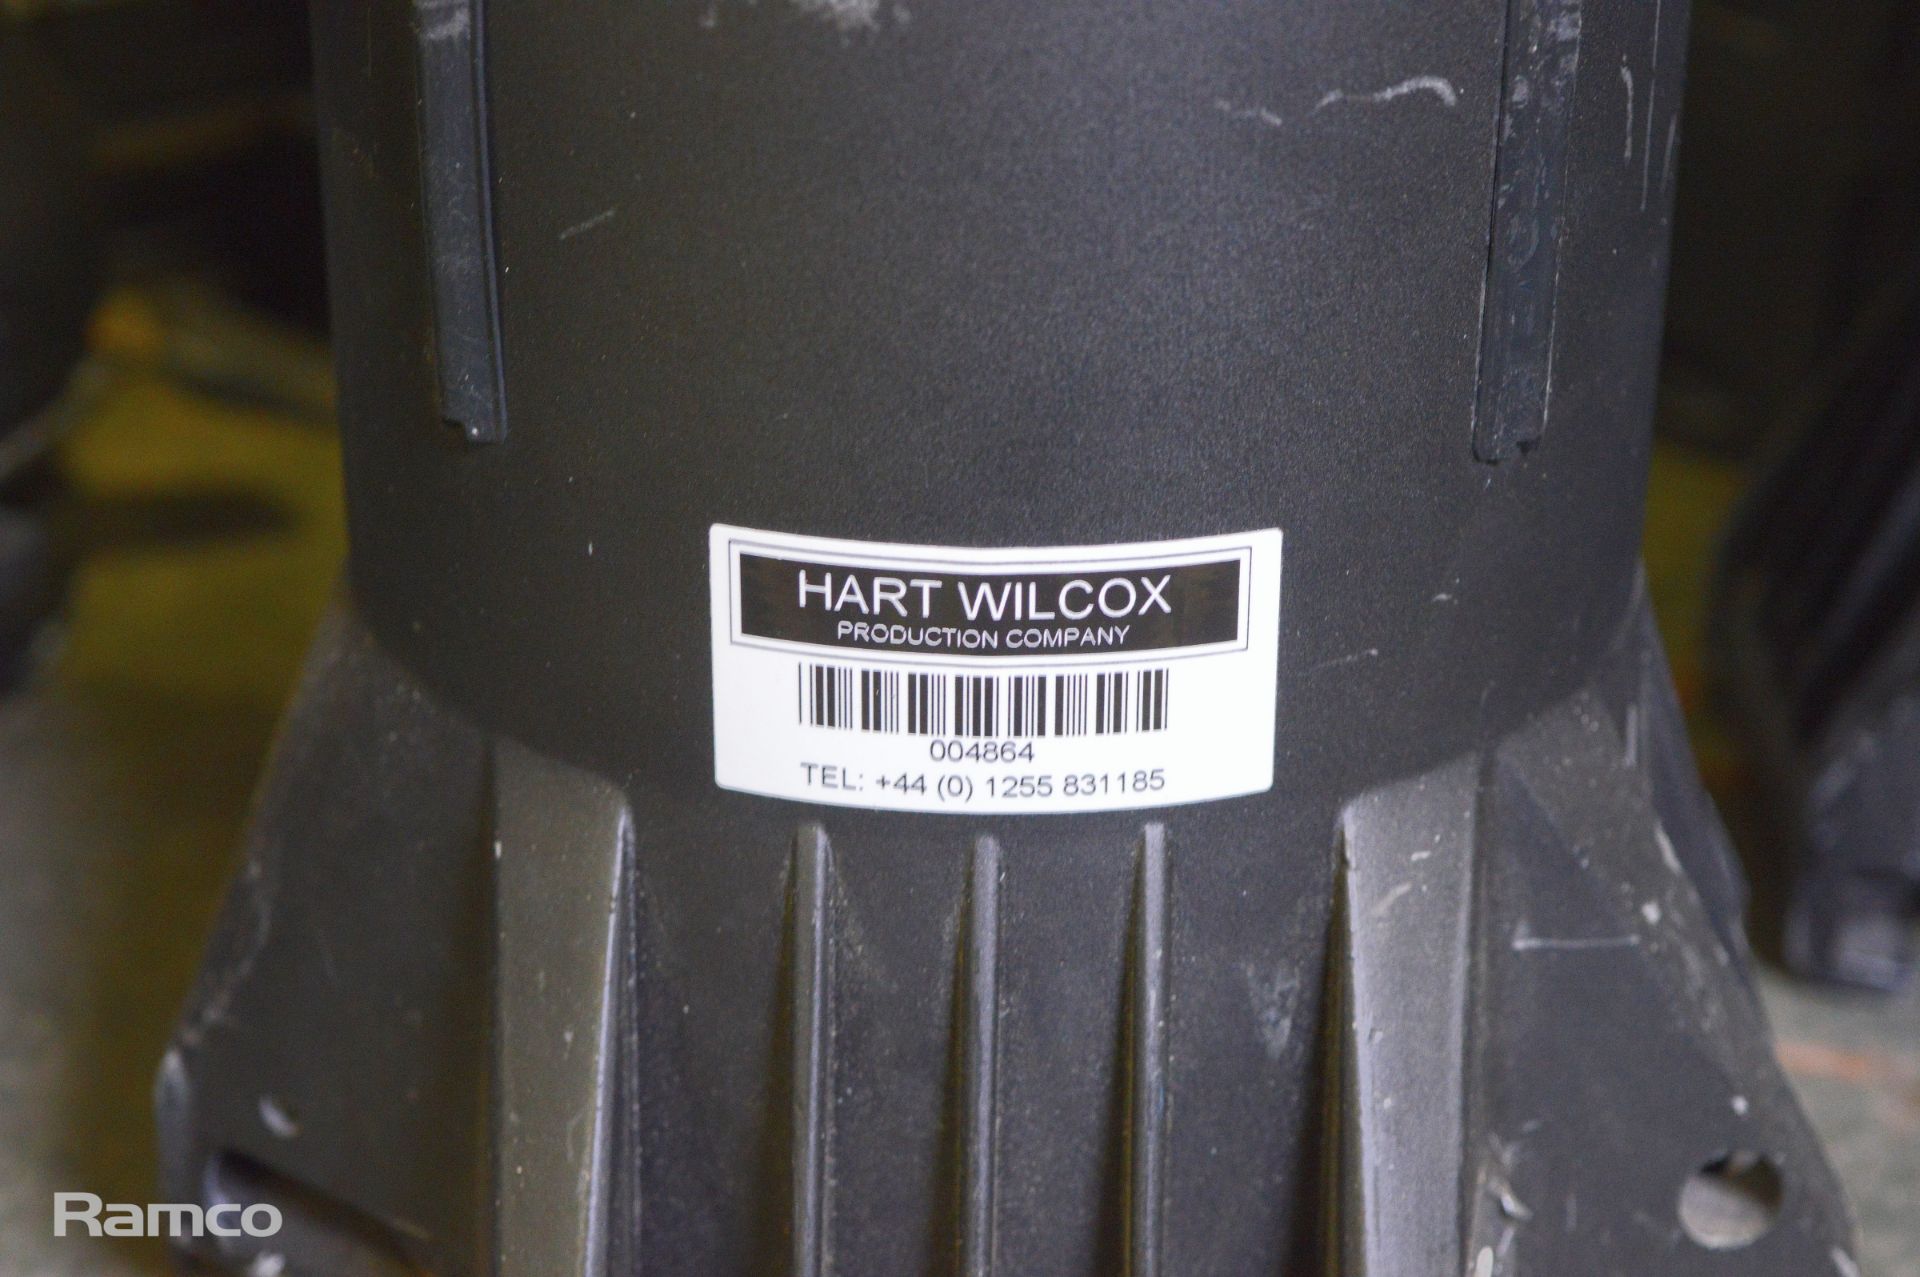 ETC Source Four Ellipsoidal 750 Luminaire Covers & Lens angle unit spares or repair - Image 8 of 8